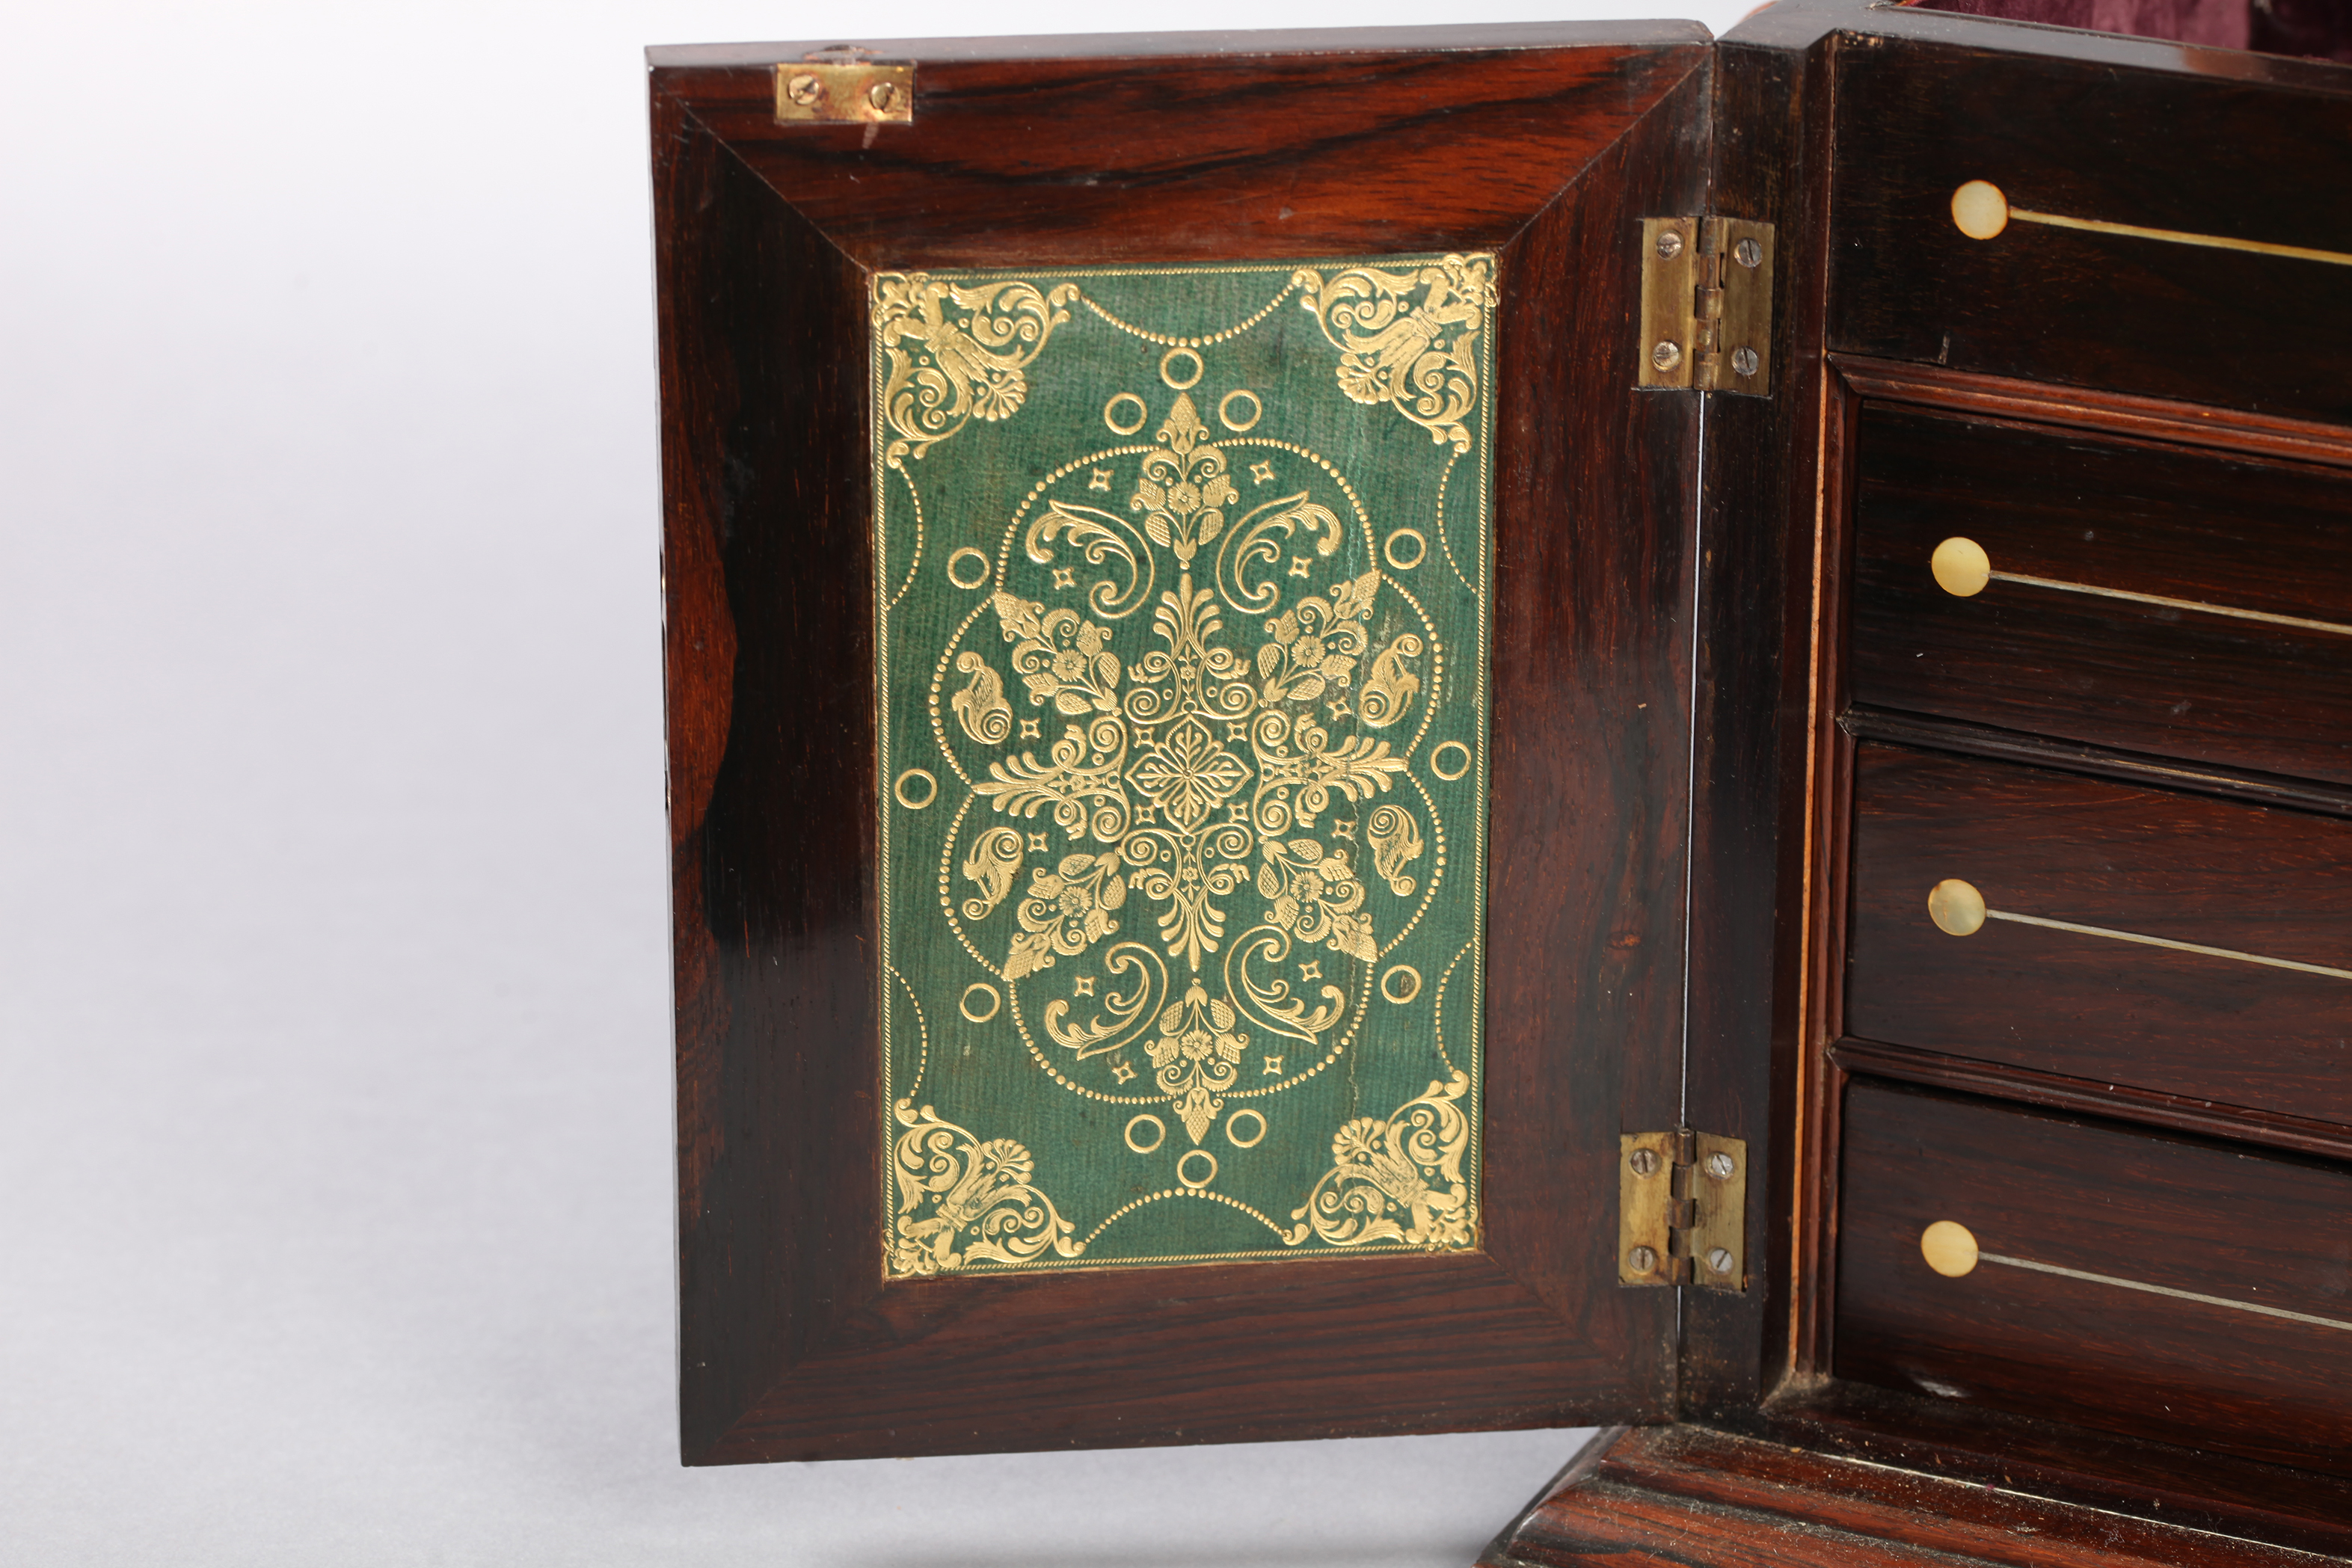 A VICTORIAN MOTHER OF PEARL INLAID ROSEWOOD TABLE CABINET with domed sarcophagus shaped hinged lid - Image 5 of 5